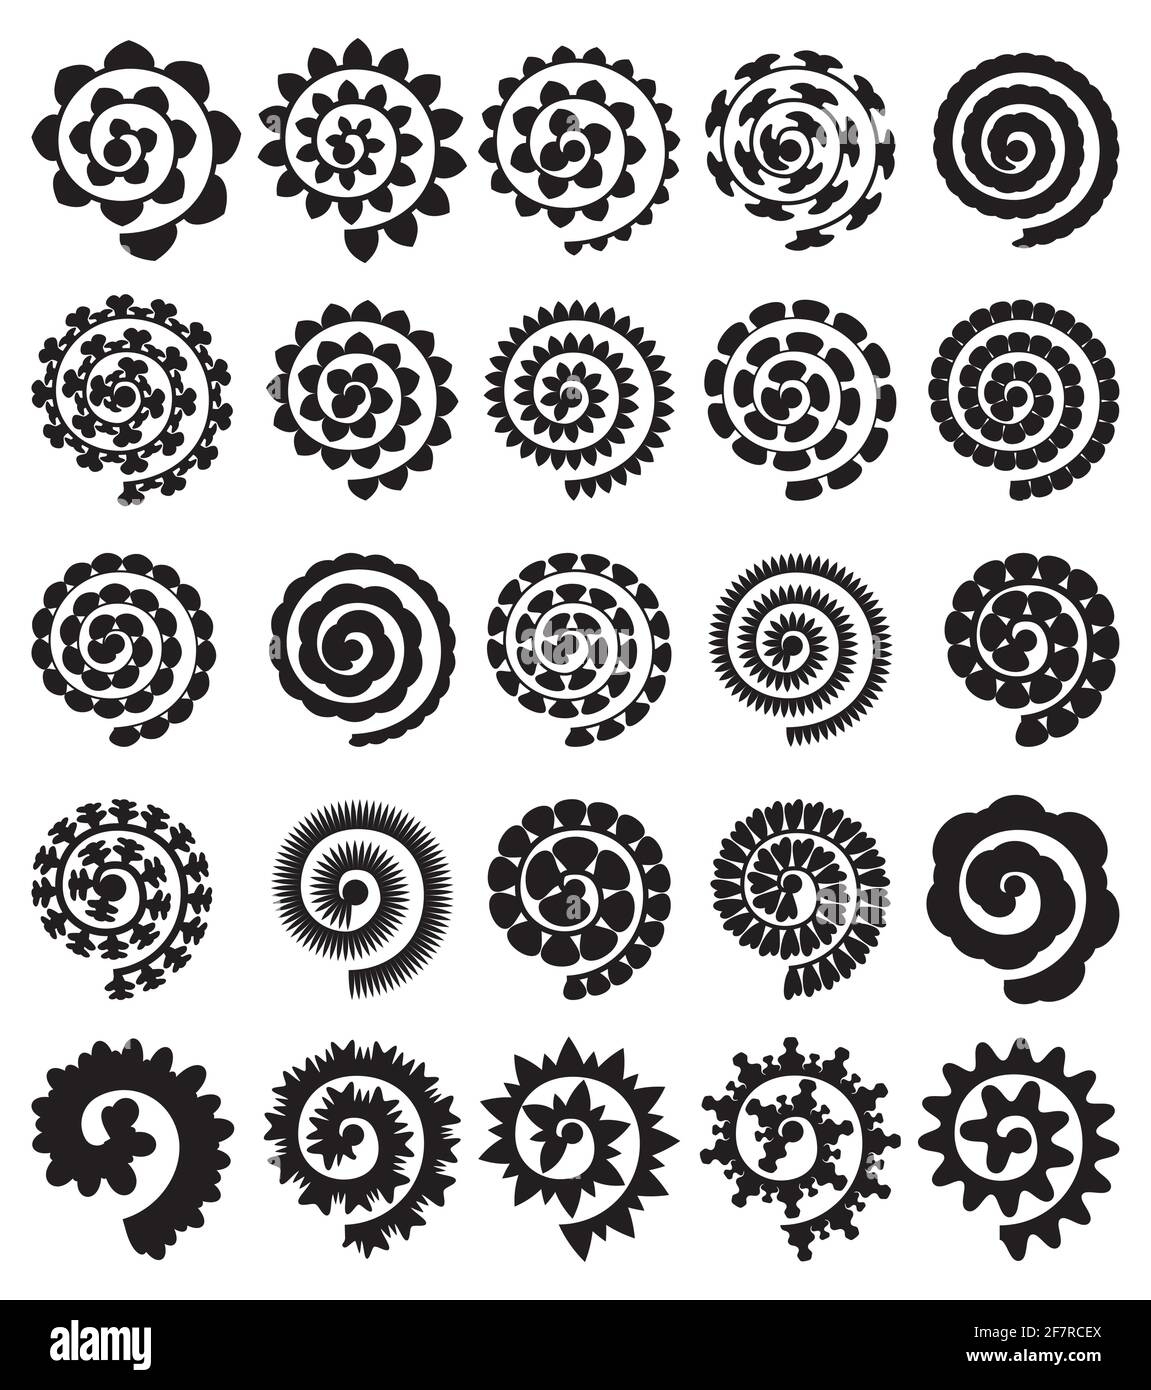 Rolled Paper Flower. Vector Illustration. Paper Cut Template Isolated on White. Stock Vector